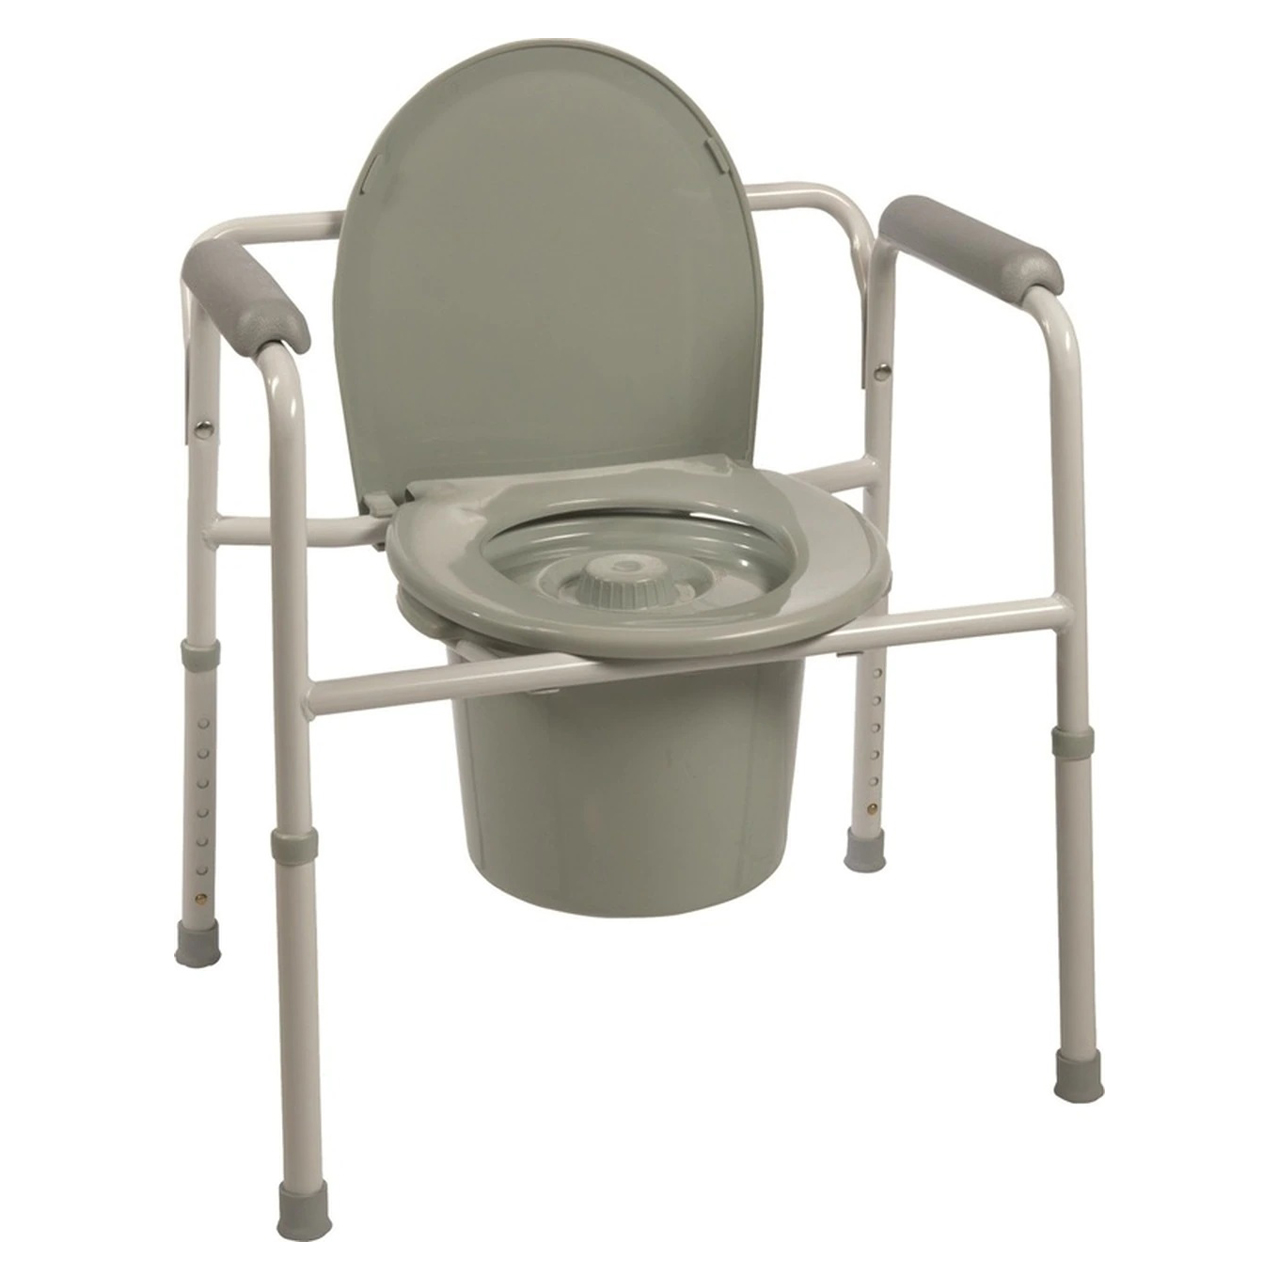 ProBasics Three-in-One Steel Commode with Plastic Armrests | Michigan USA